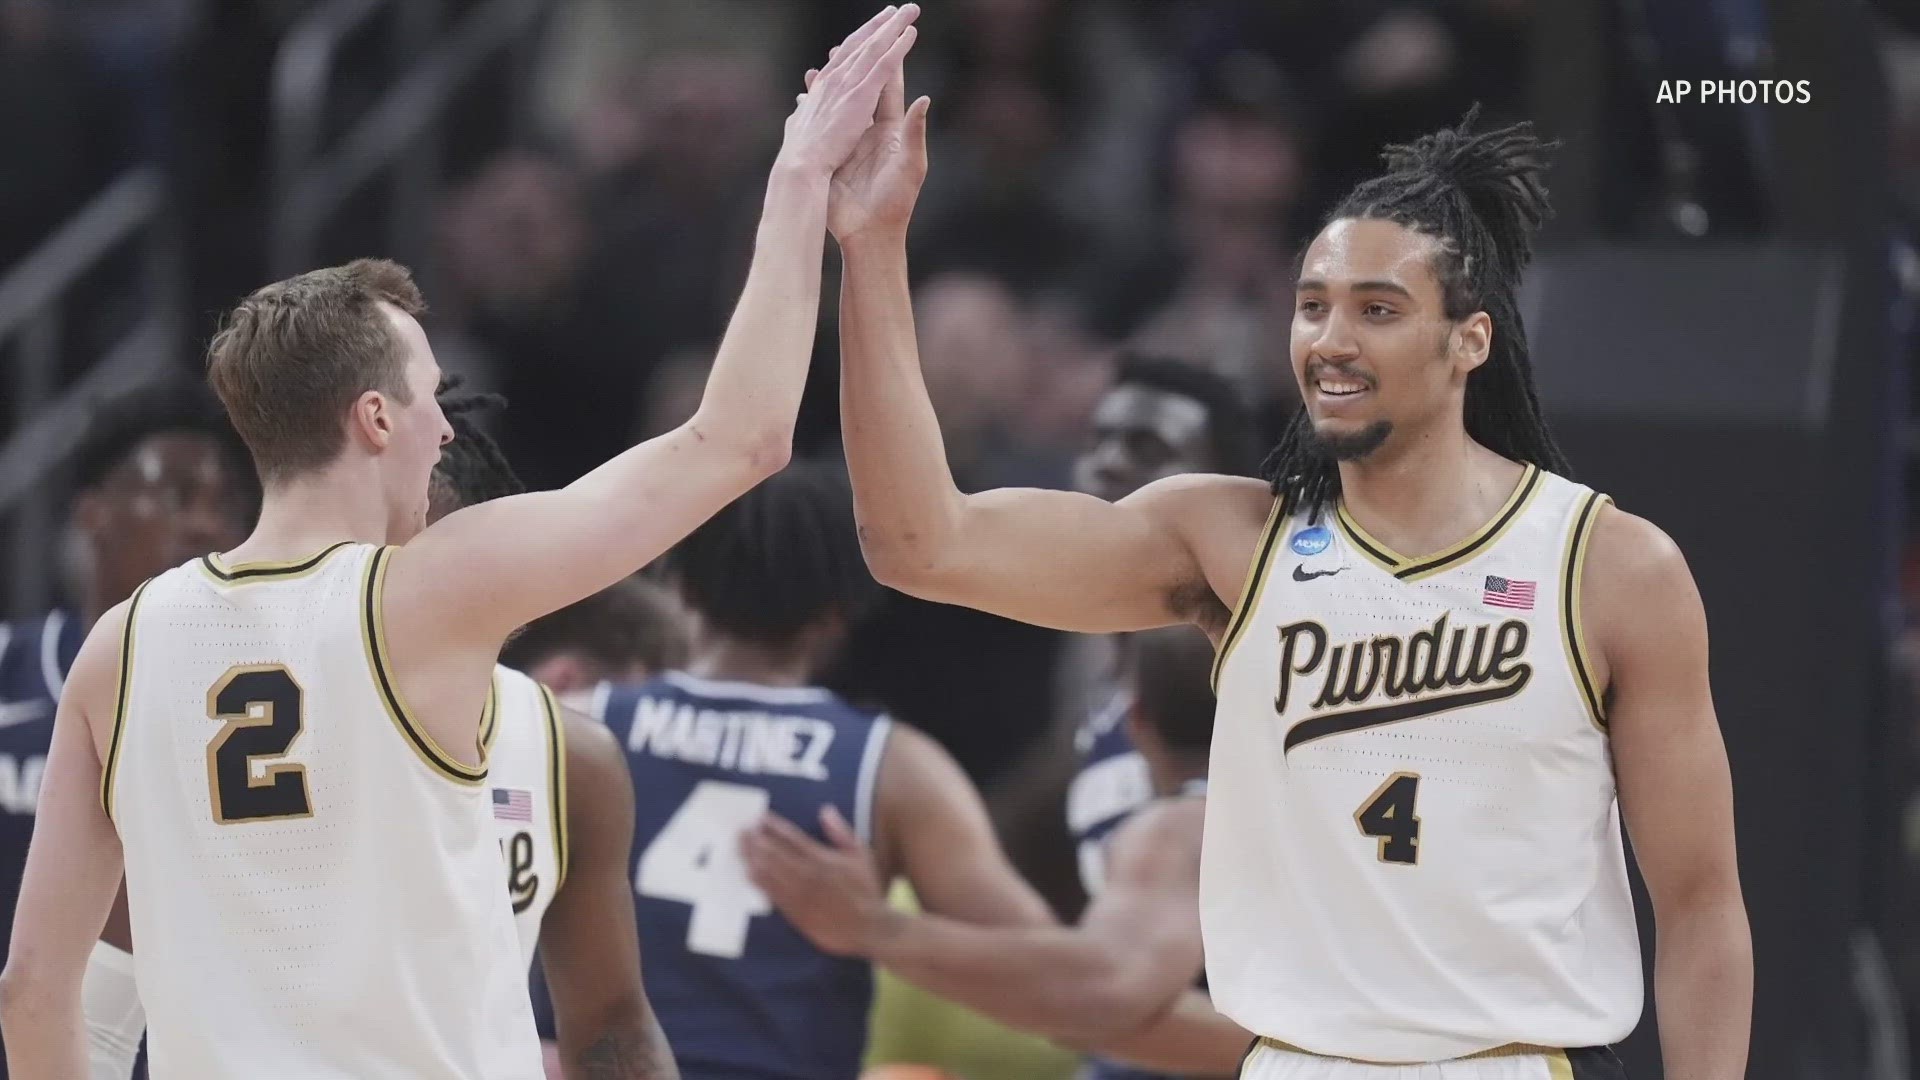 Purdue hasn't made it to a Final Four in over 40 years. Until now.